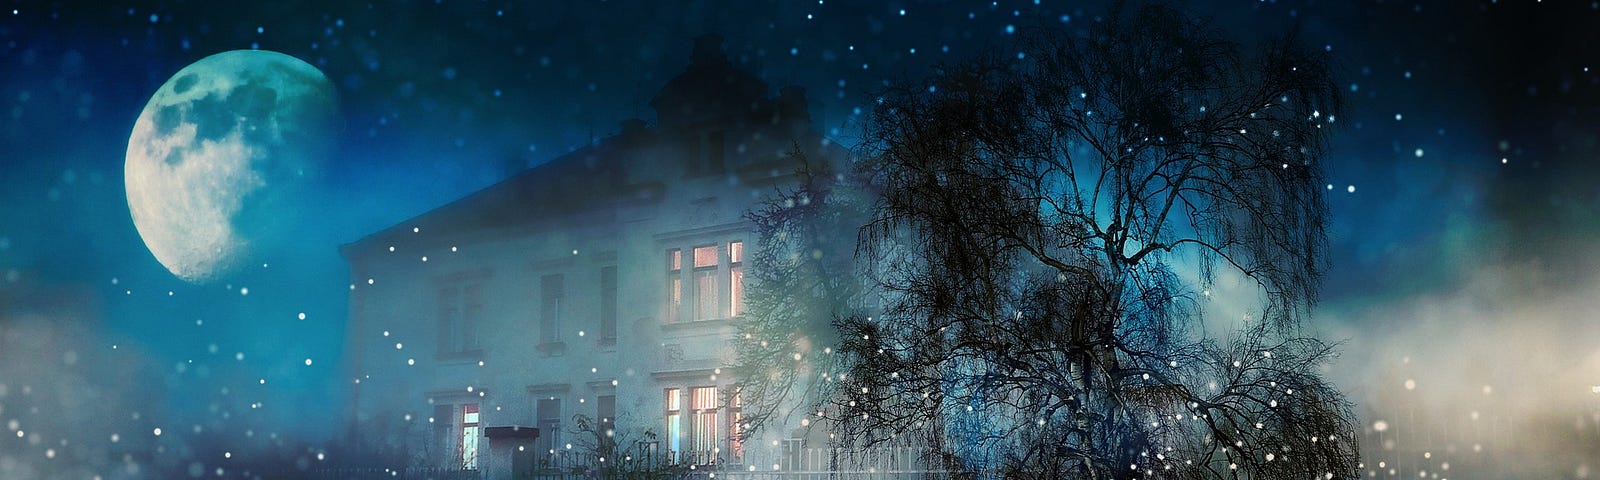 Large house at night when it is snowing